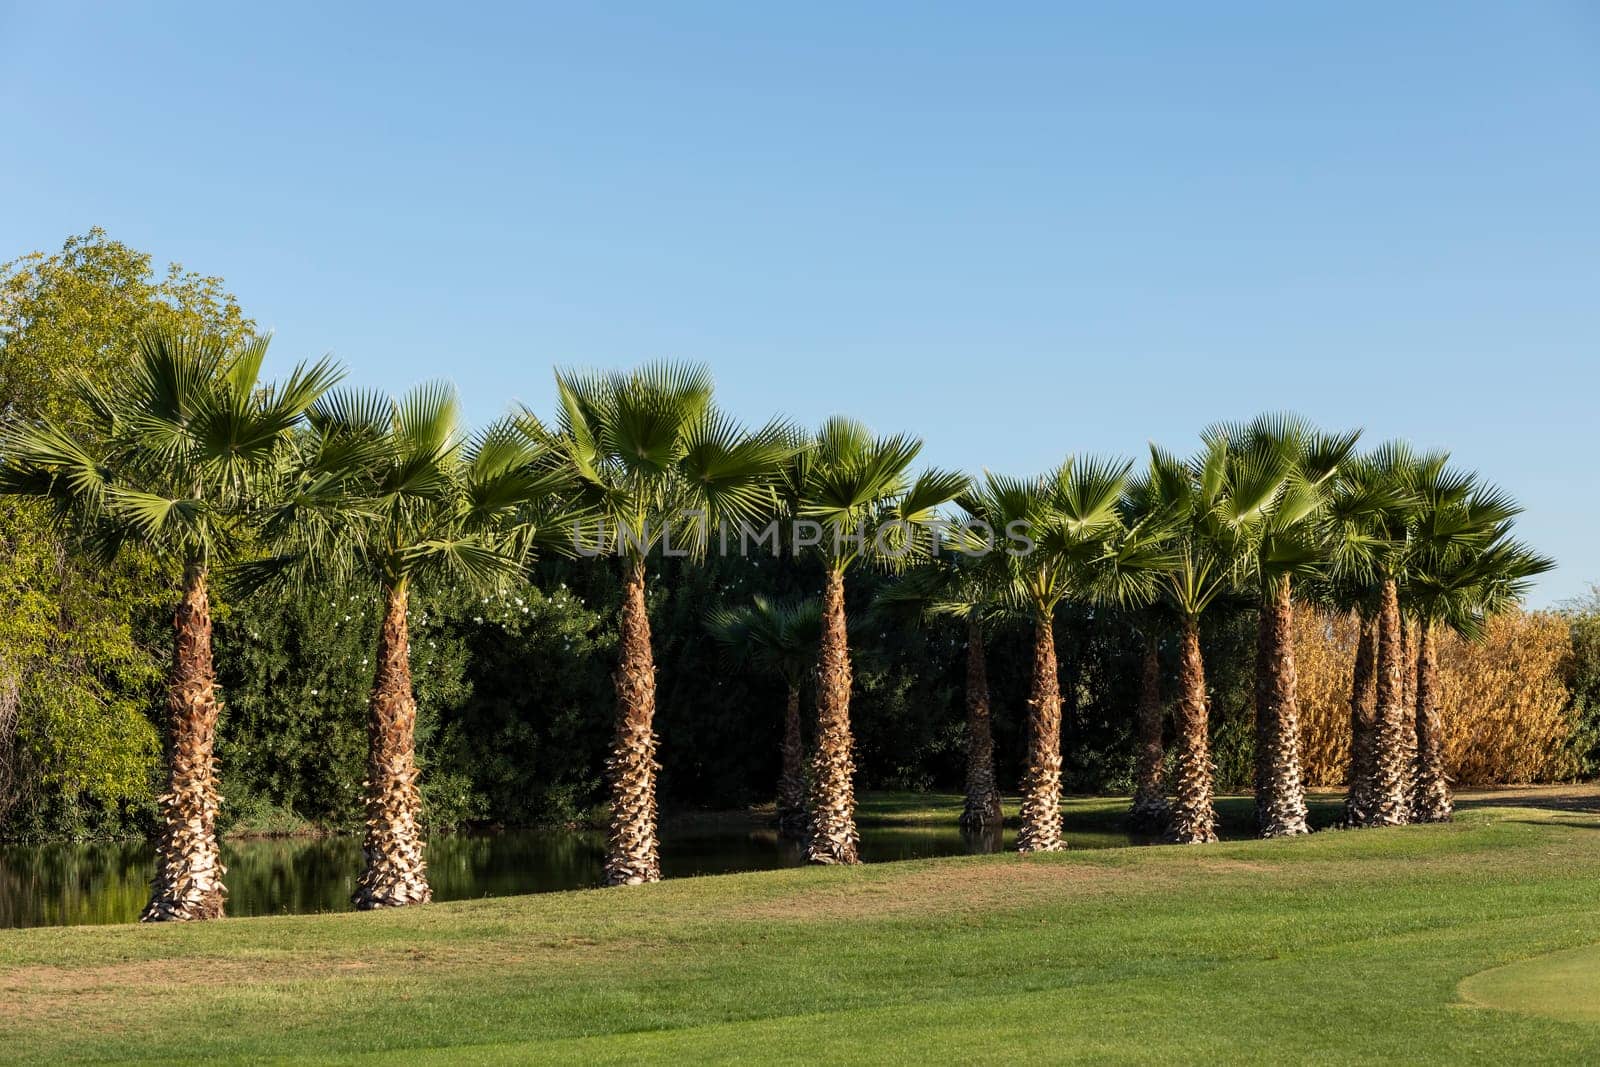 Postcard Green Lawn With Young Palm Trees Around Pond, Blue Sky On Background. Fashion, Travel, Summer, Vacation Concept. High quality photo